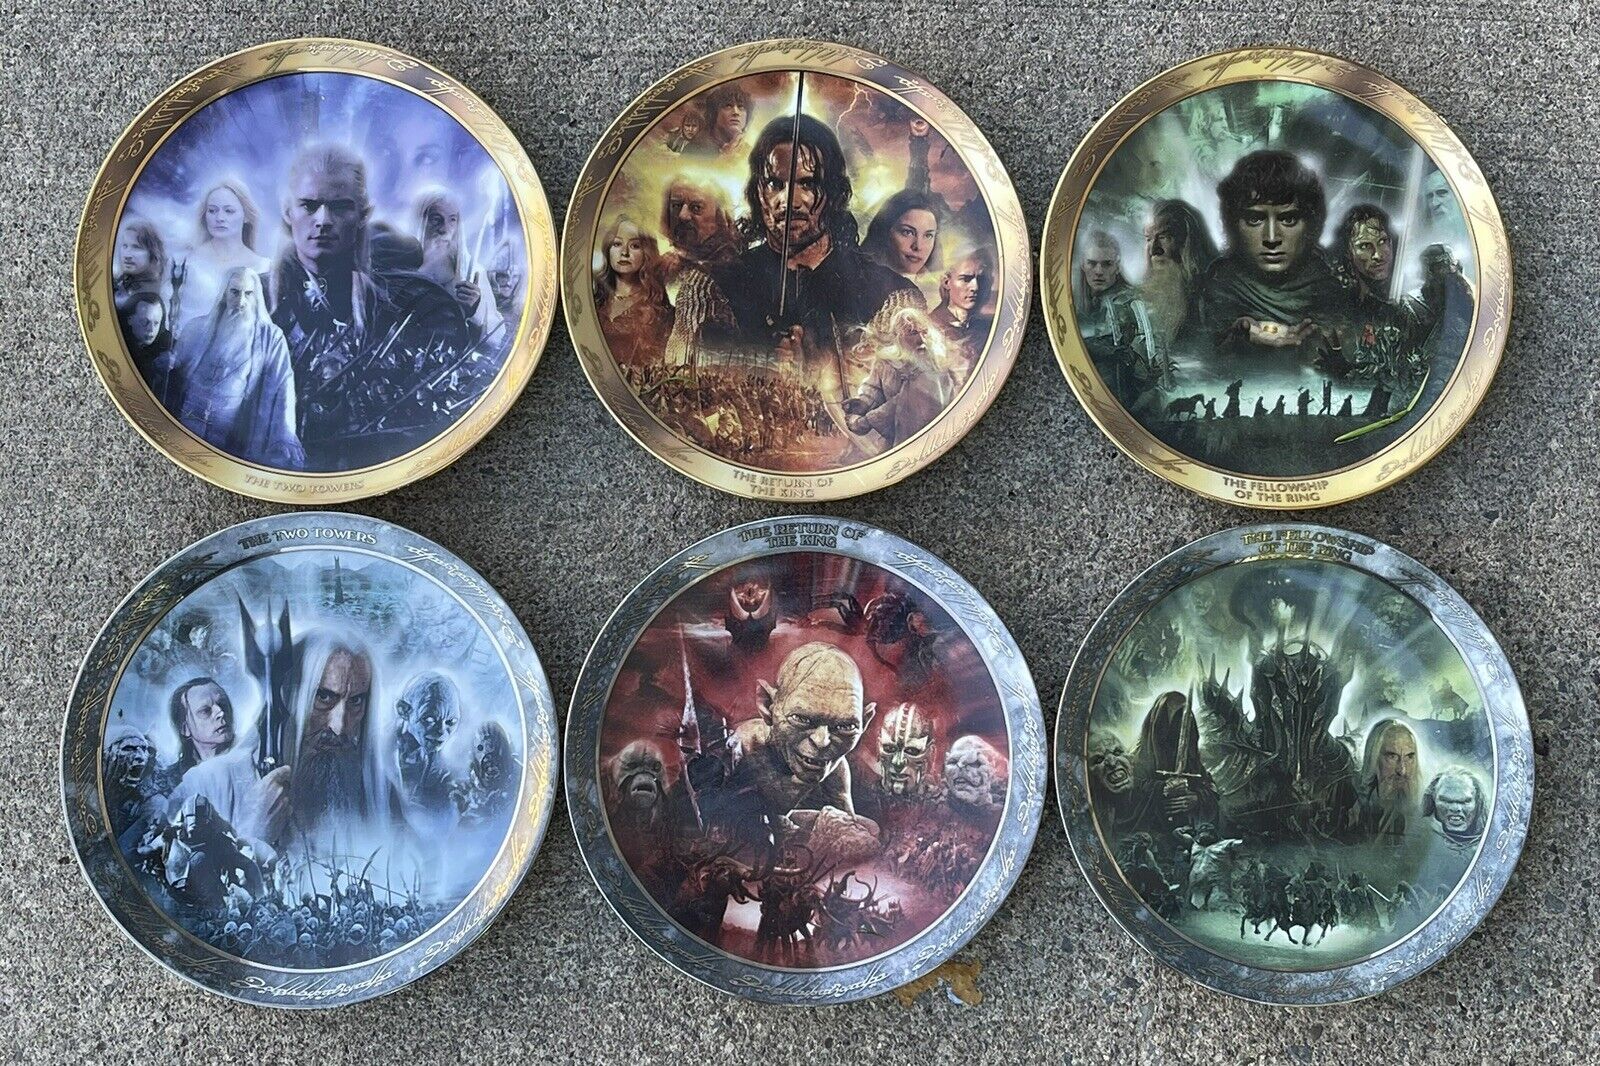 Lord of the Rings Bradford Exchange LOTR Collectible Plates Lot of 6